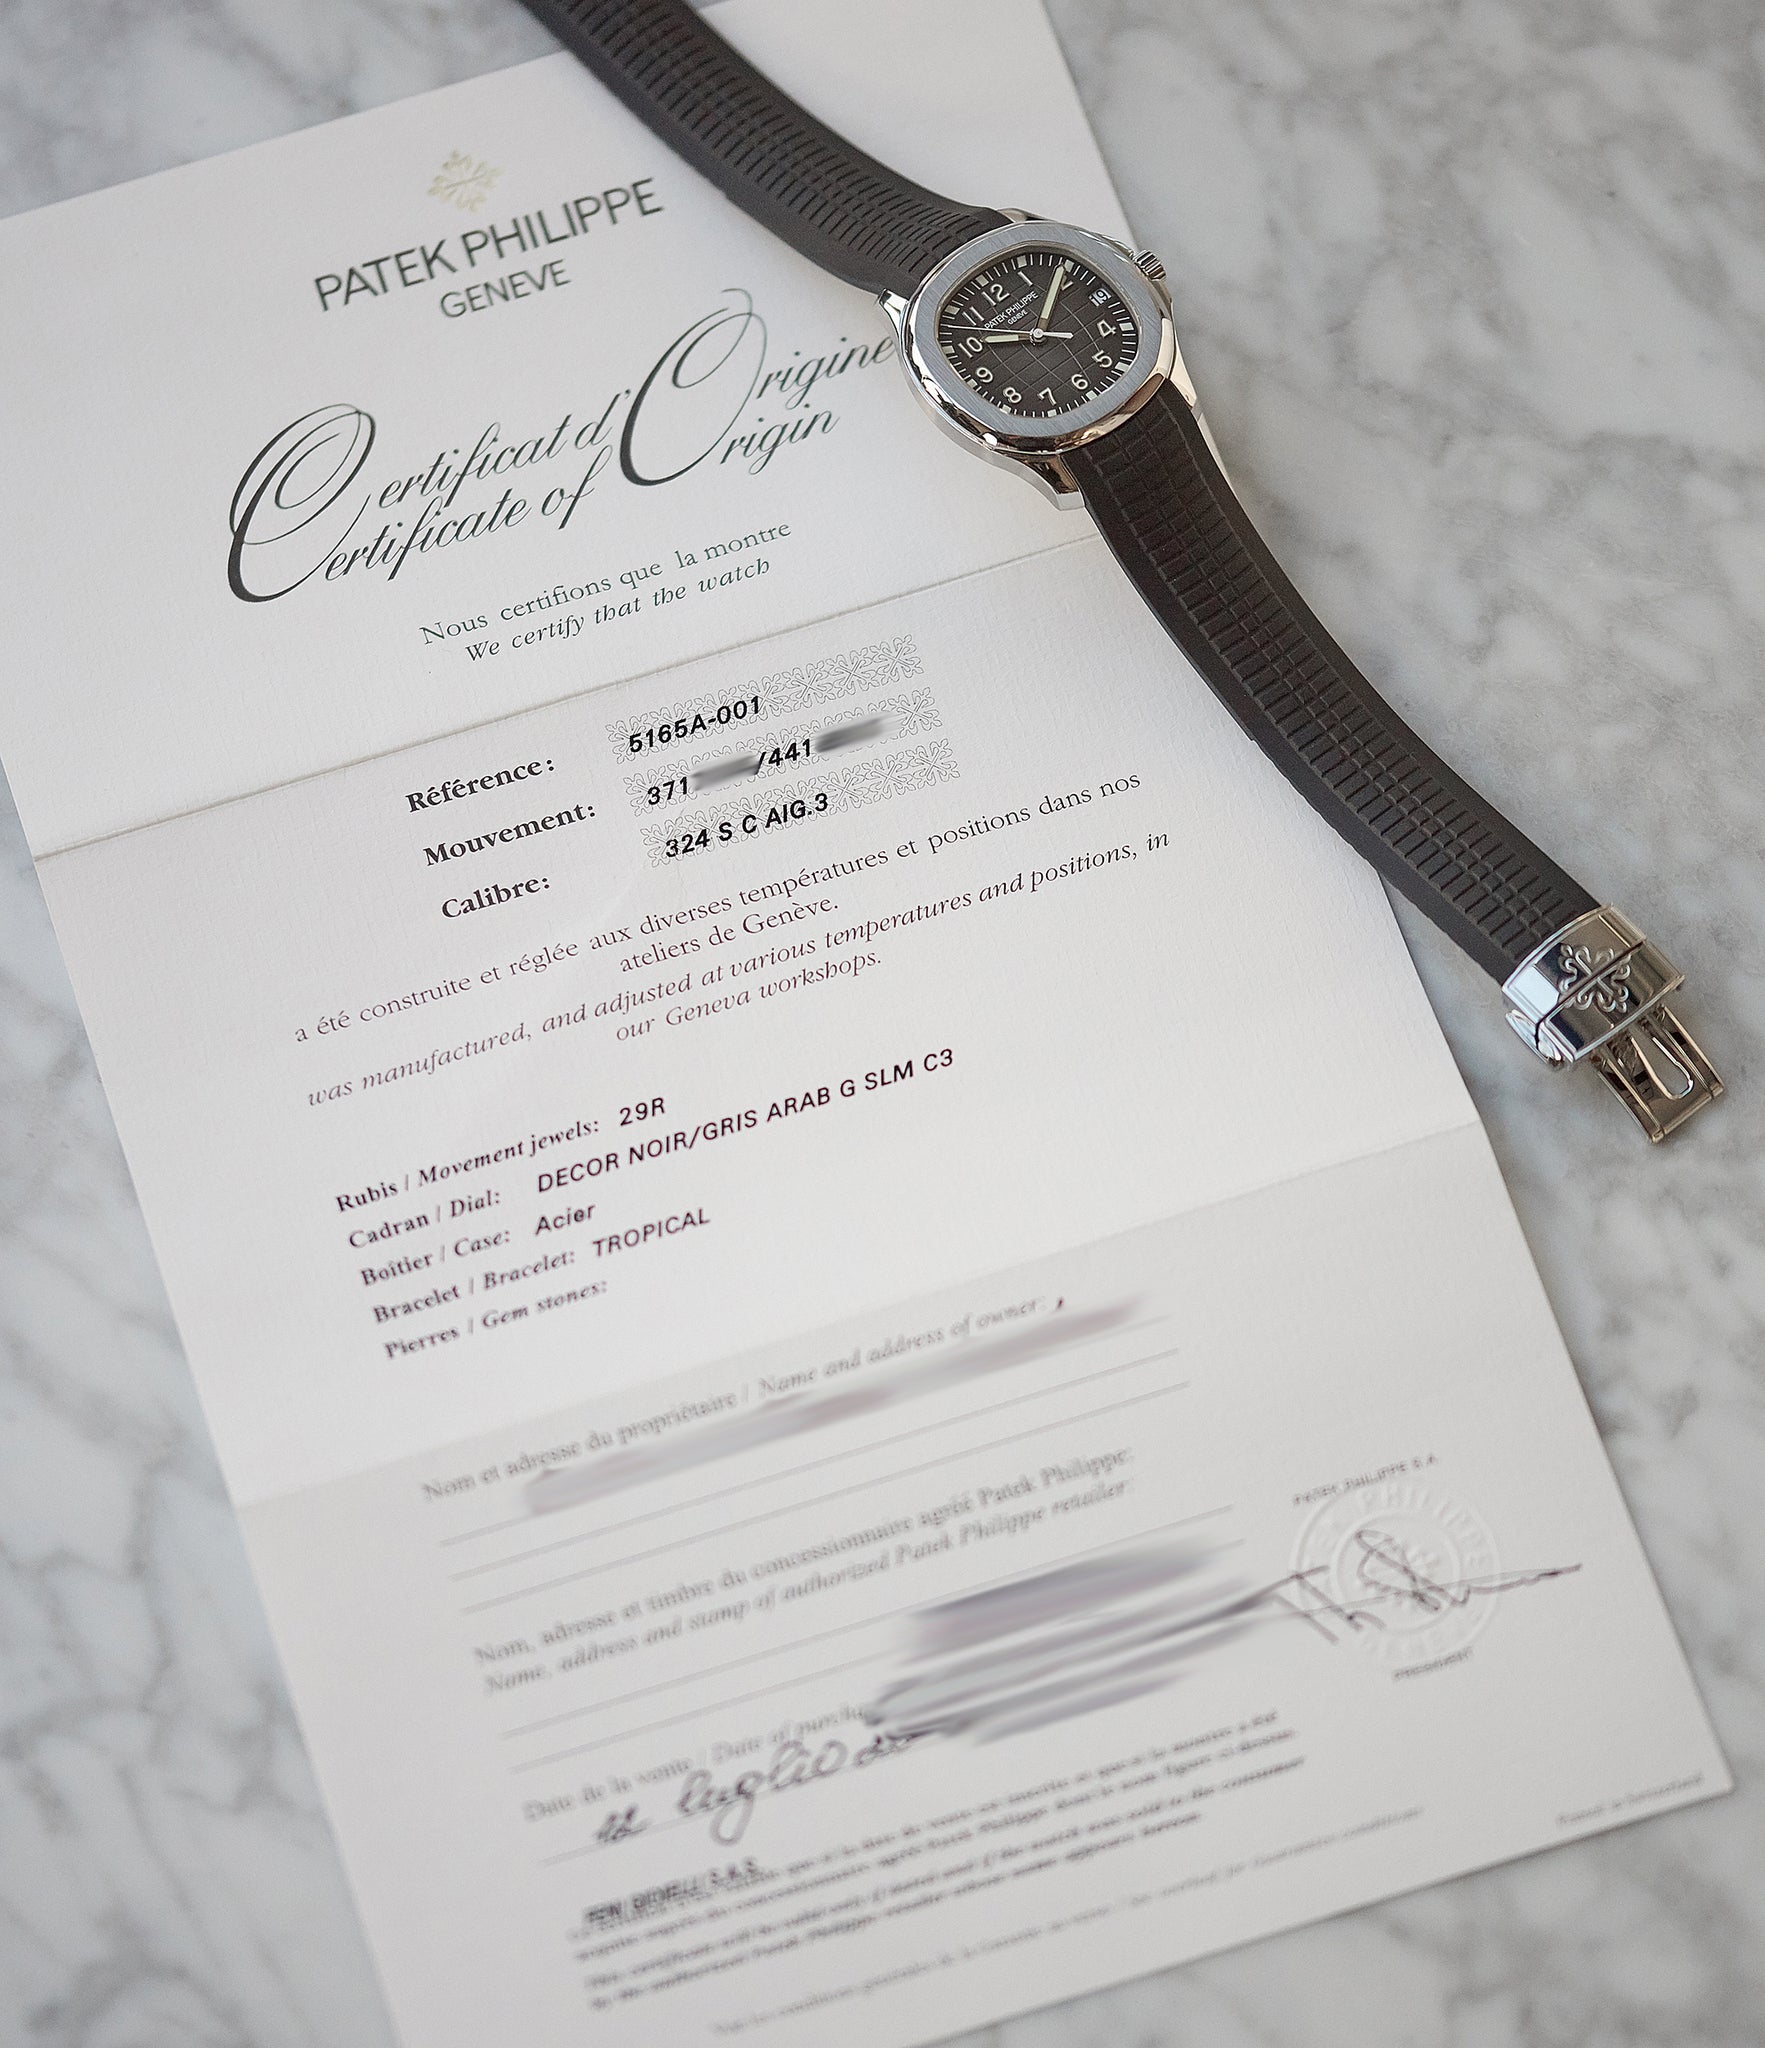 certificate of origin Patek Philippe Aquanaut 5165A-001 transitional steel sport watch for sale online at A Collected Man London UK specialist of rare watches